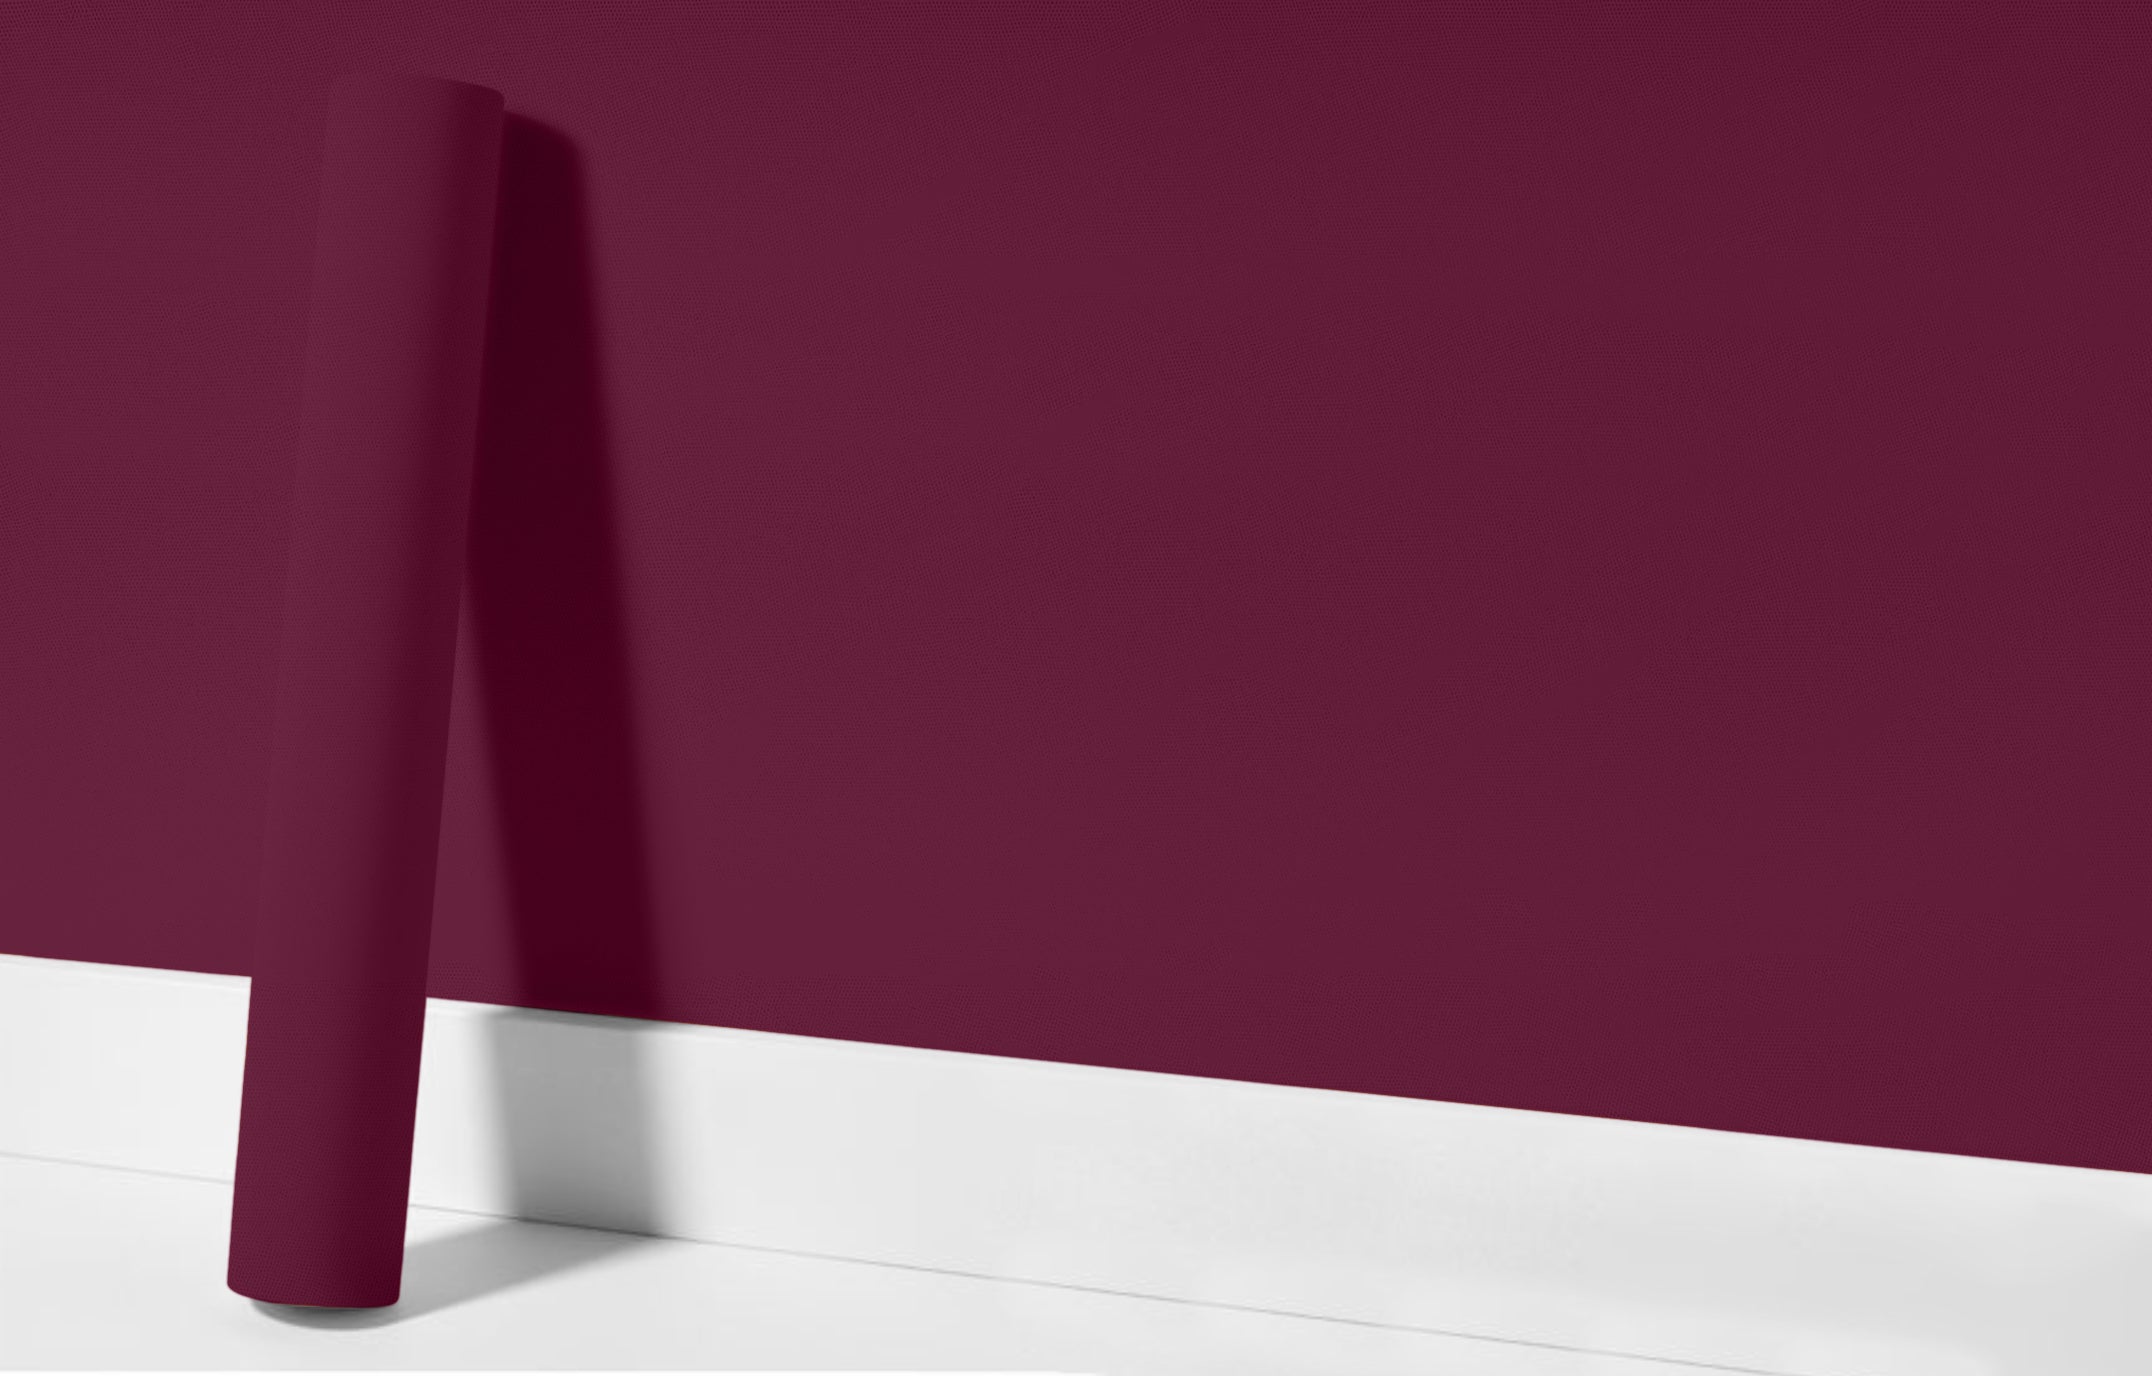 Peel & Stick Removable Re-usable Paint - Color RAL 4004 Claret Violet - offRAL™ - RALRAW LLC, USA